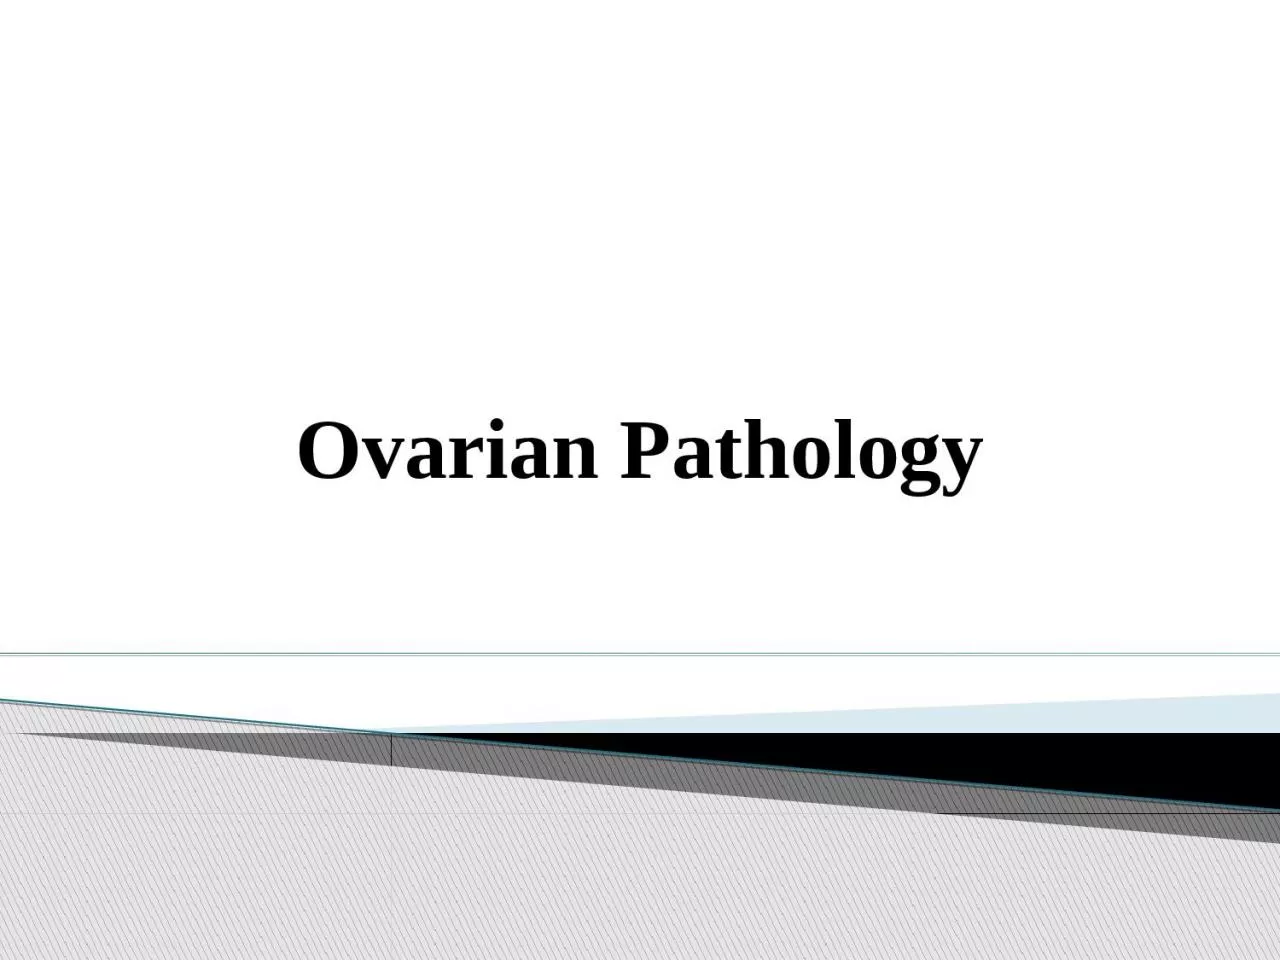 Ovarian Pathology POLYCYSTIC OVARIES (also called 